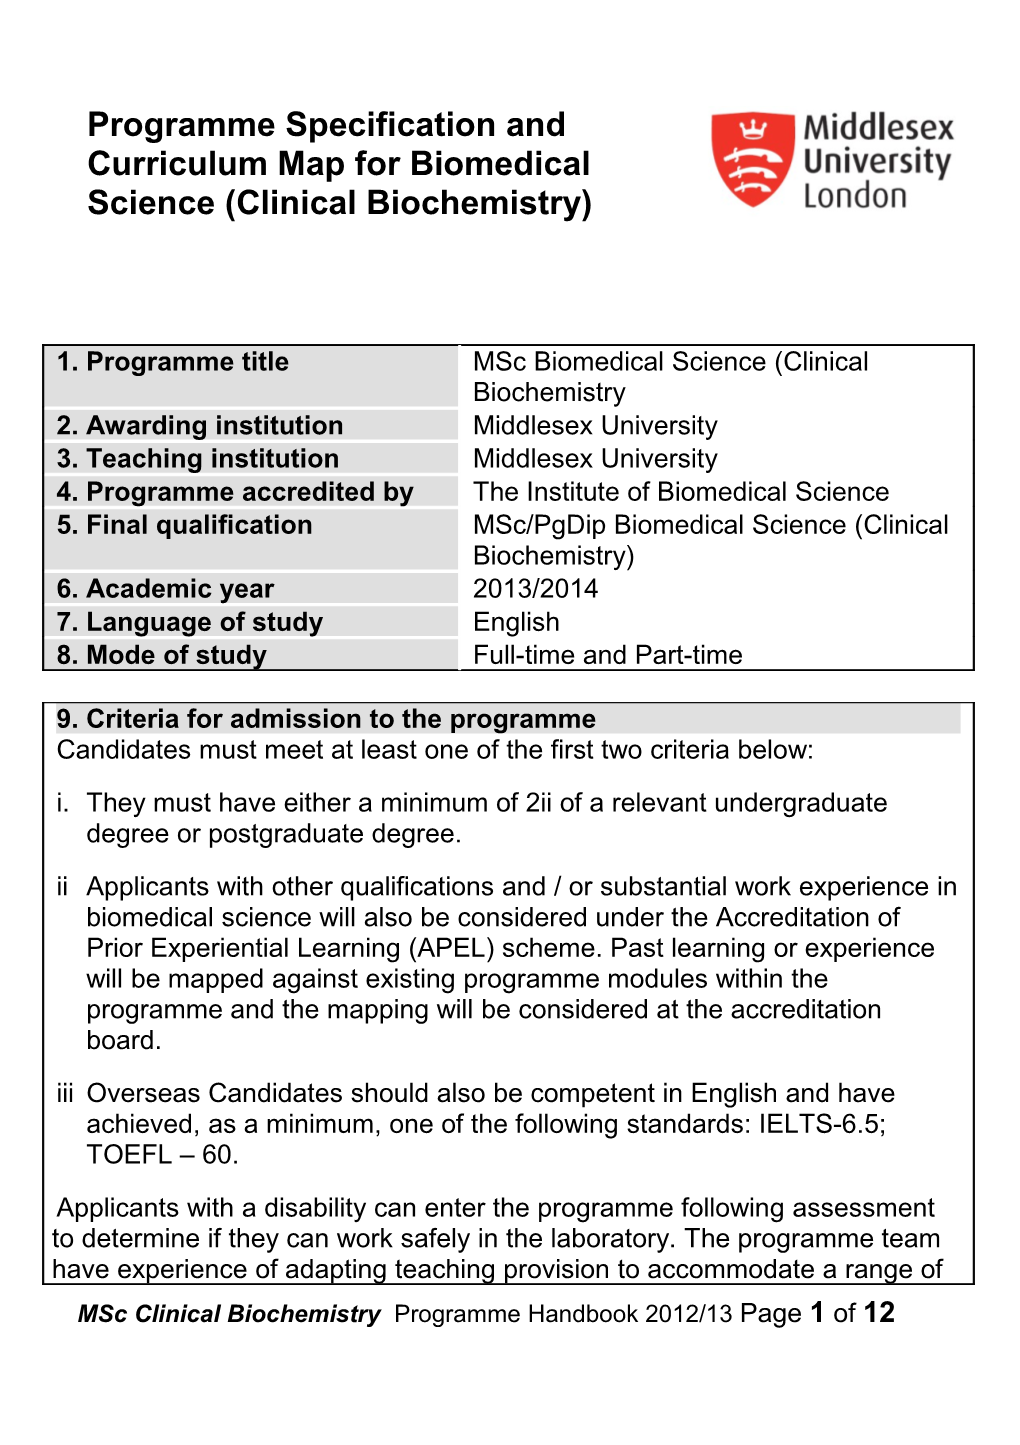 Programme Specification and Curriculum Map for Biomedical Science (Clinical Biochemistry)